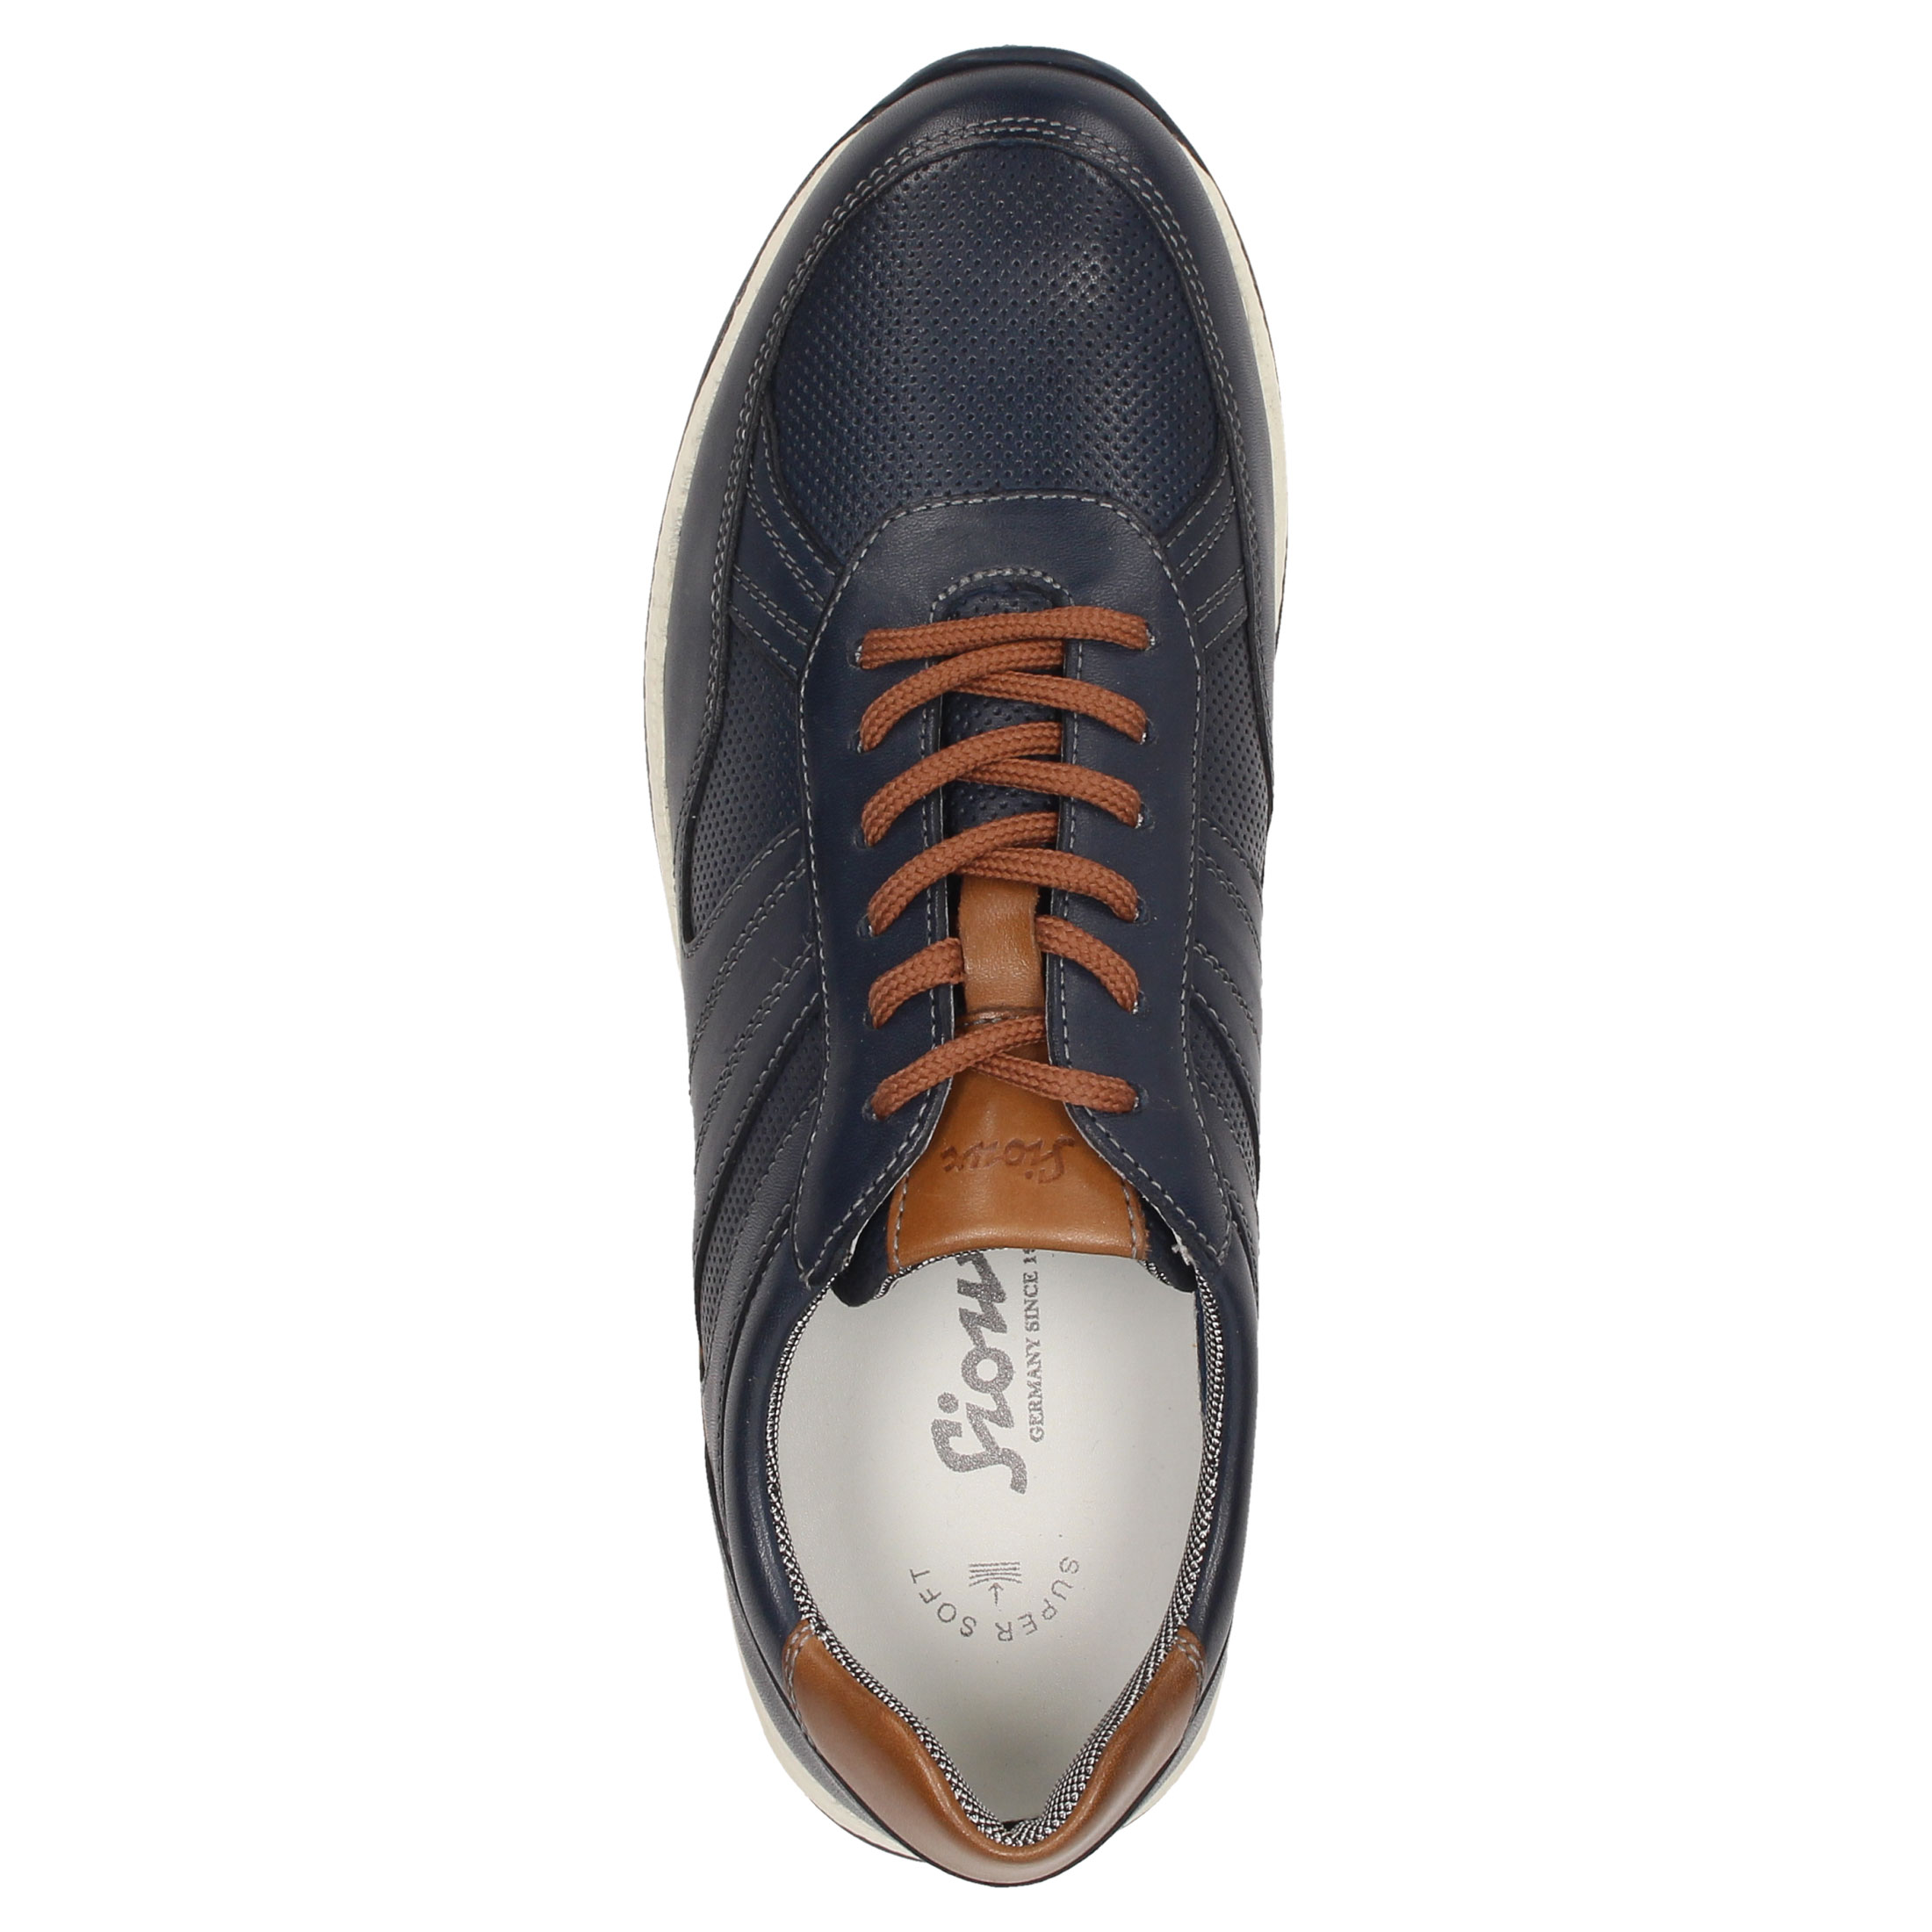 Sioux Rojaro 707 - Indaco smooth leather